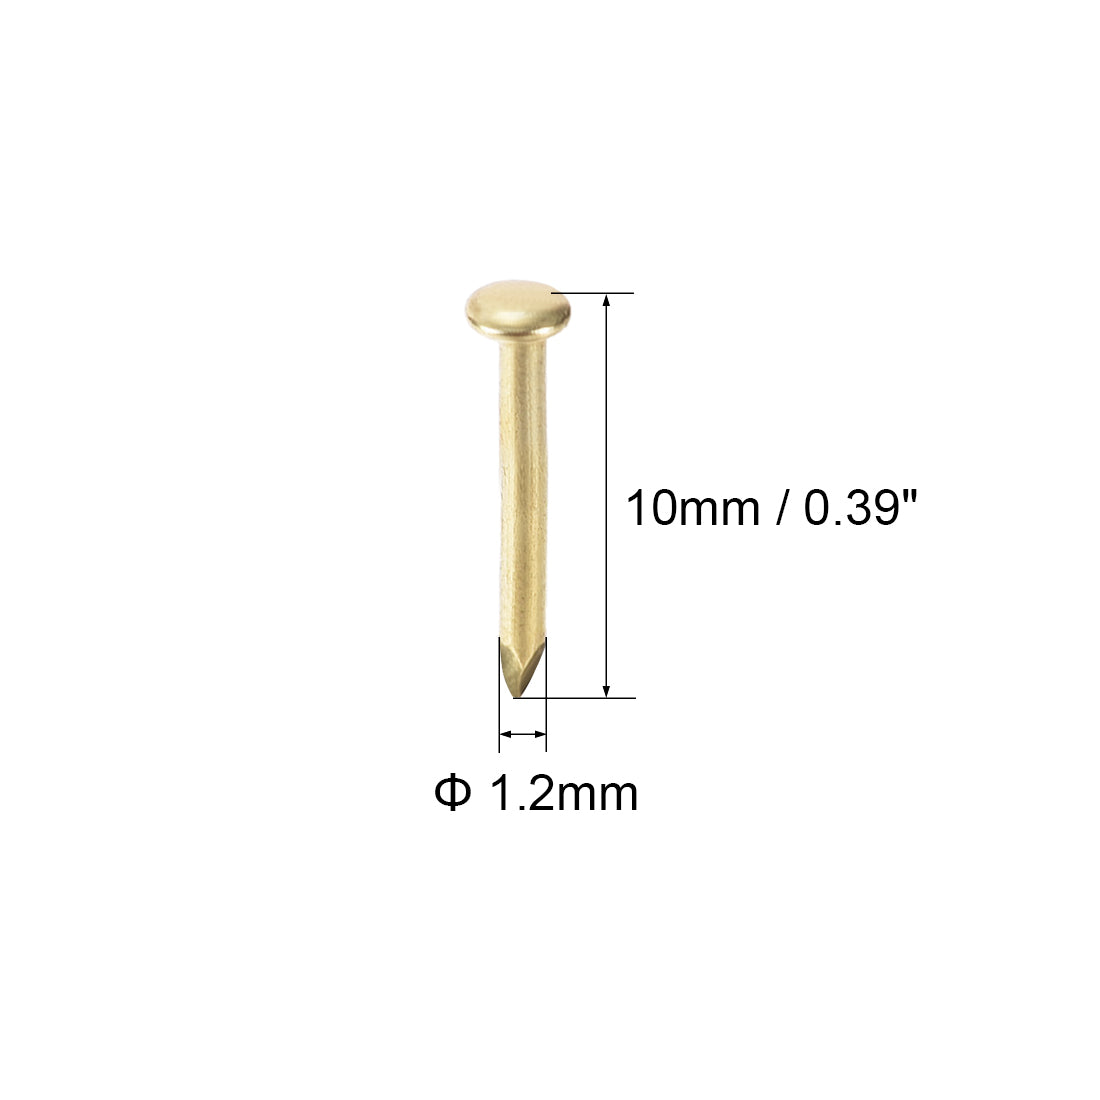 uxcell Uxcell Small Tiny Nails 1.2X10mm for DIY Decorative Pictures Wooden Boxes Household Accessories Gold Tone 400pcs